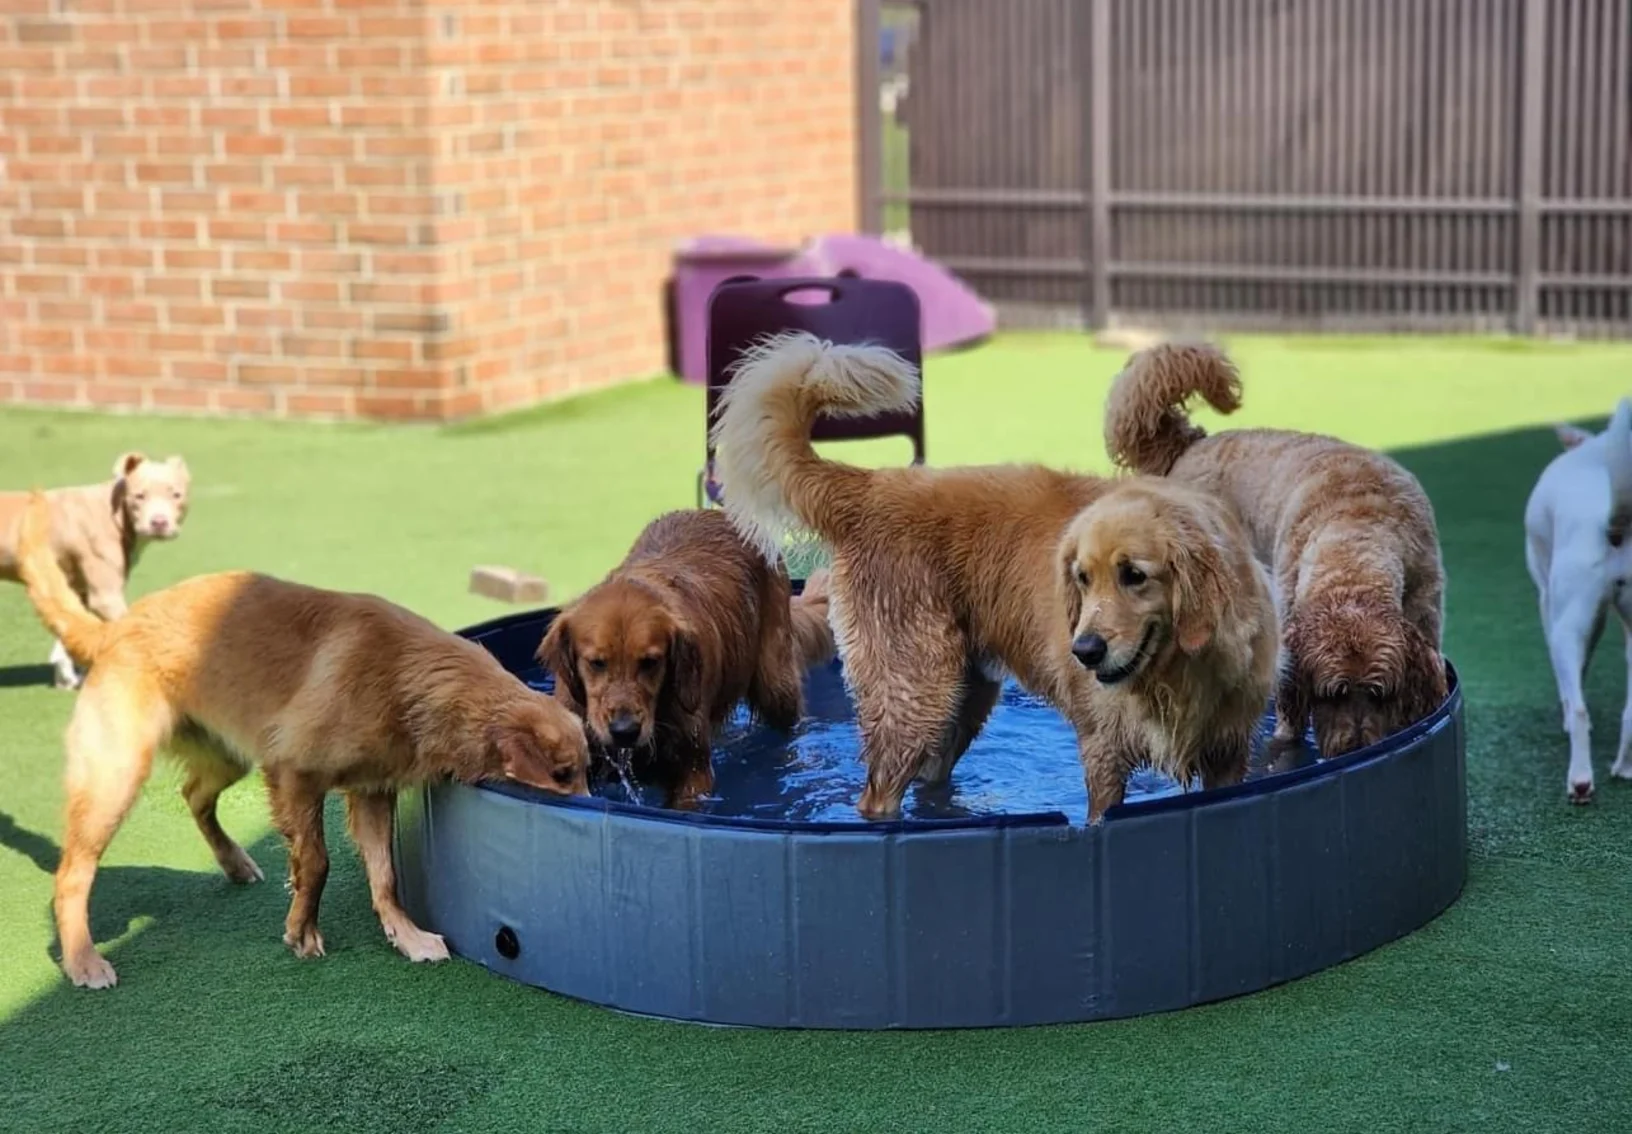 A group of dogs playing in a miniature outdoor pool